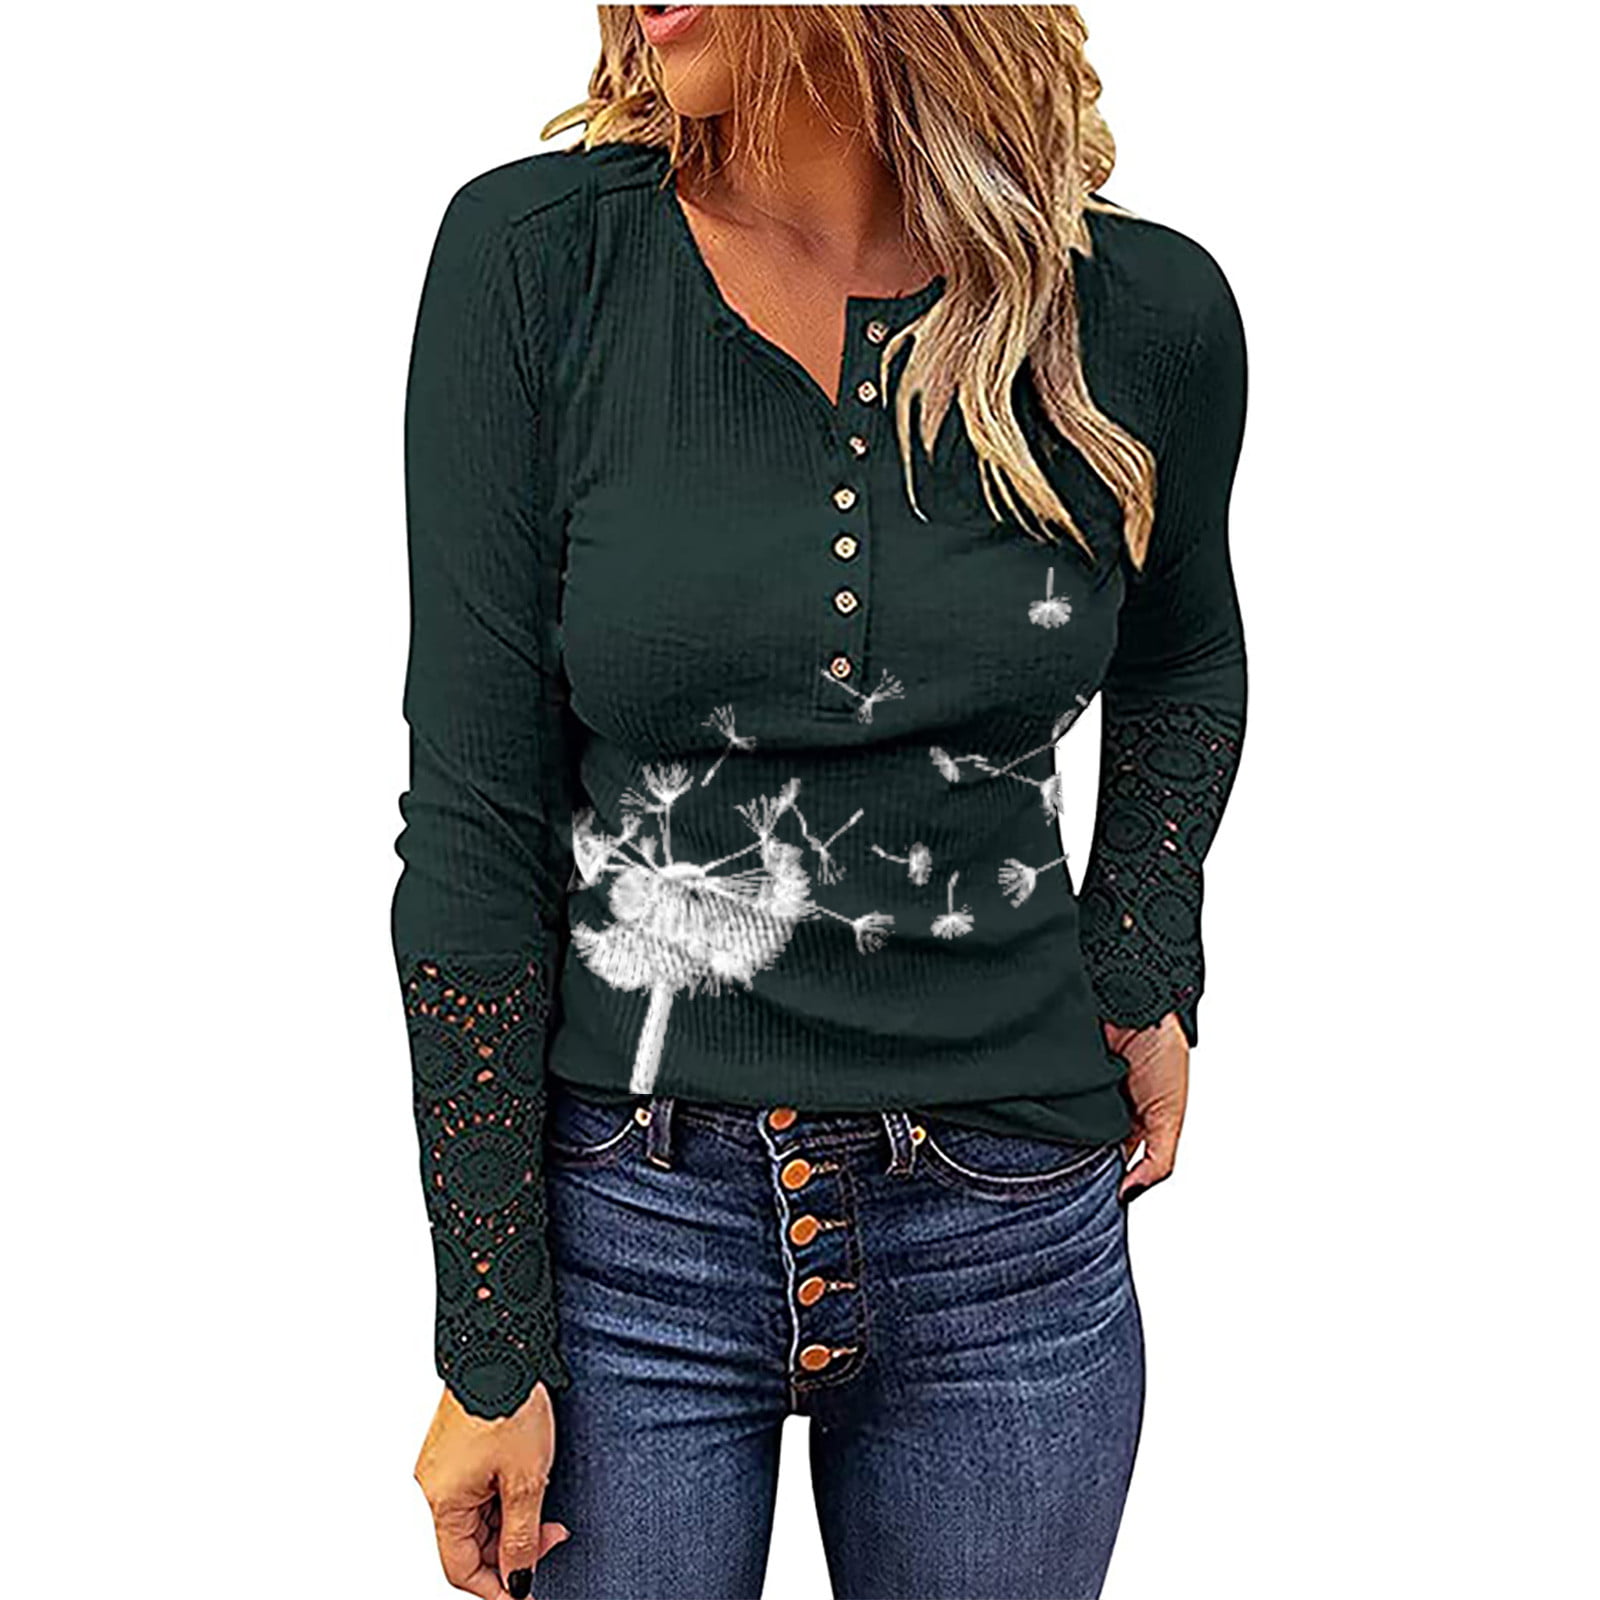 Women's Lace-Trimmed Henley Top